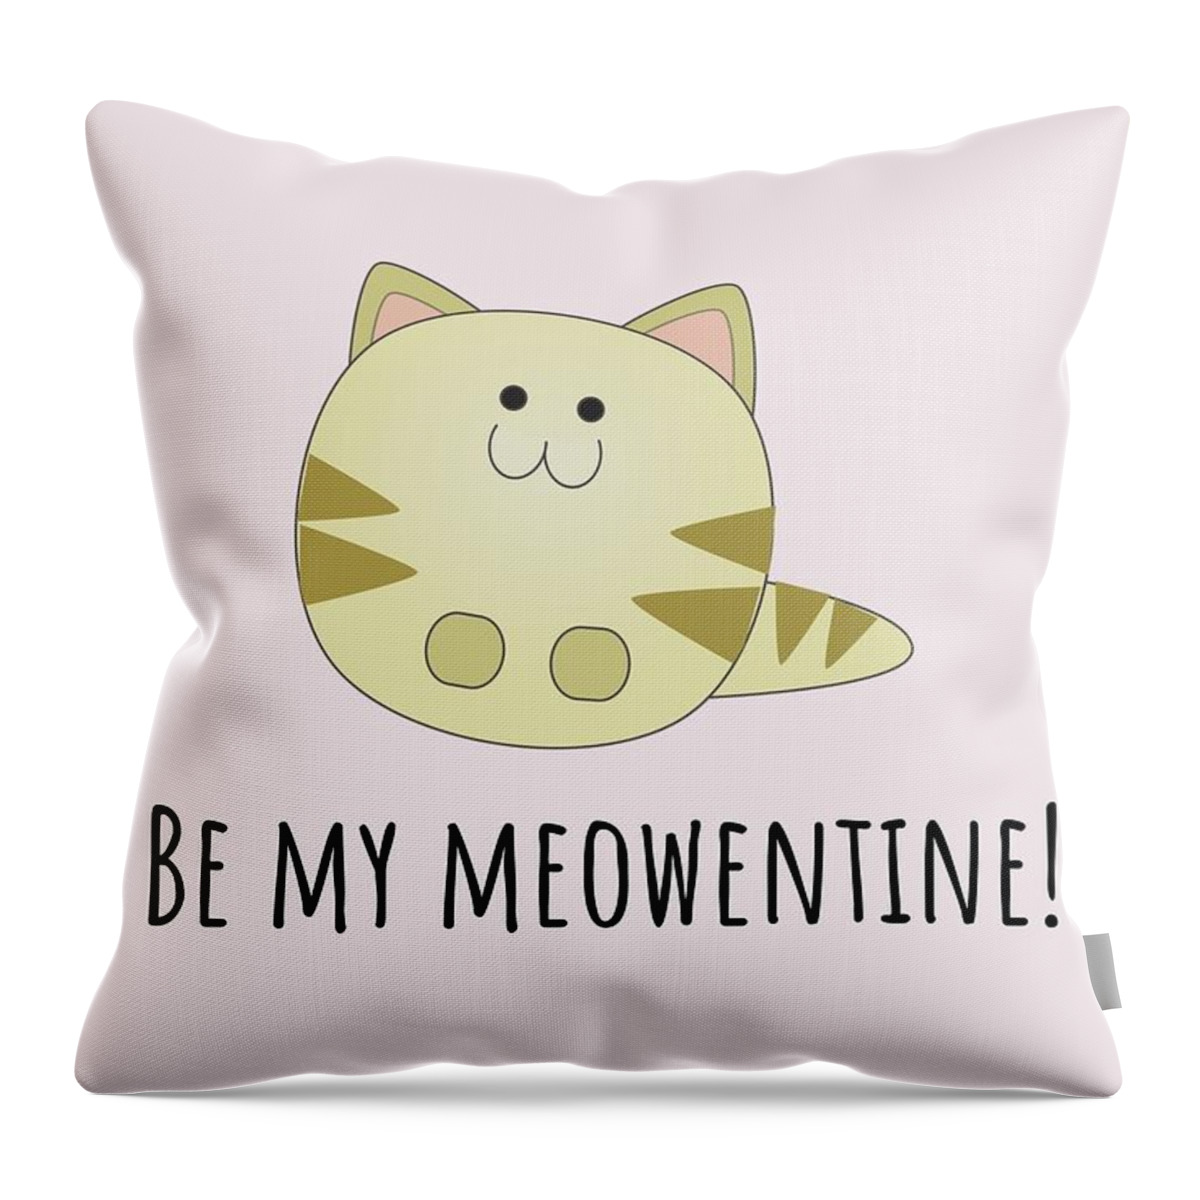 Funny Throw Pillow featuring the digital art Cute Cat Valentine Card - Cat Lover Card - Adorable Cat Valentine's Day Card - Meowentine by Joey Lott